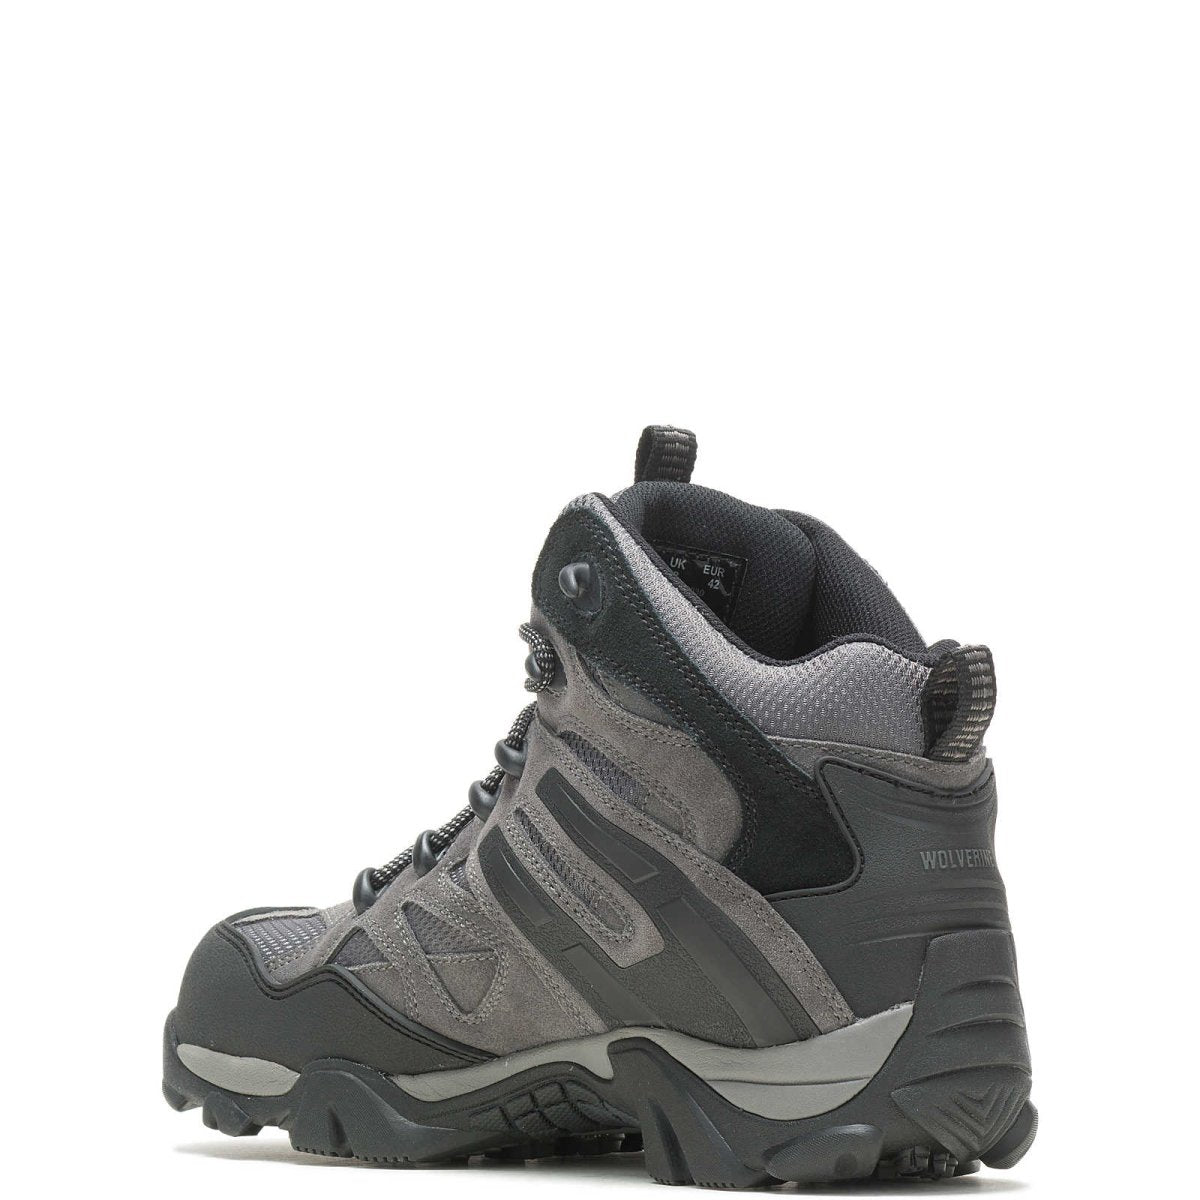 WOLVERINE WILDERNESS COMPOSITE TOE MEN'S WORK BOOT (W080030) IN CHARCOAL GREY - TLW Shoes